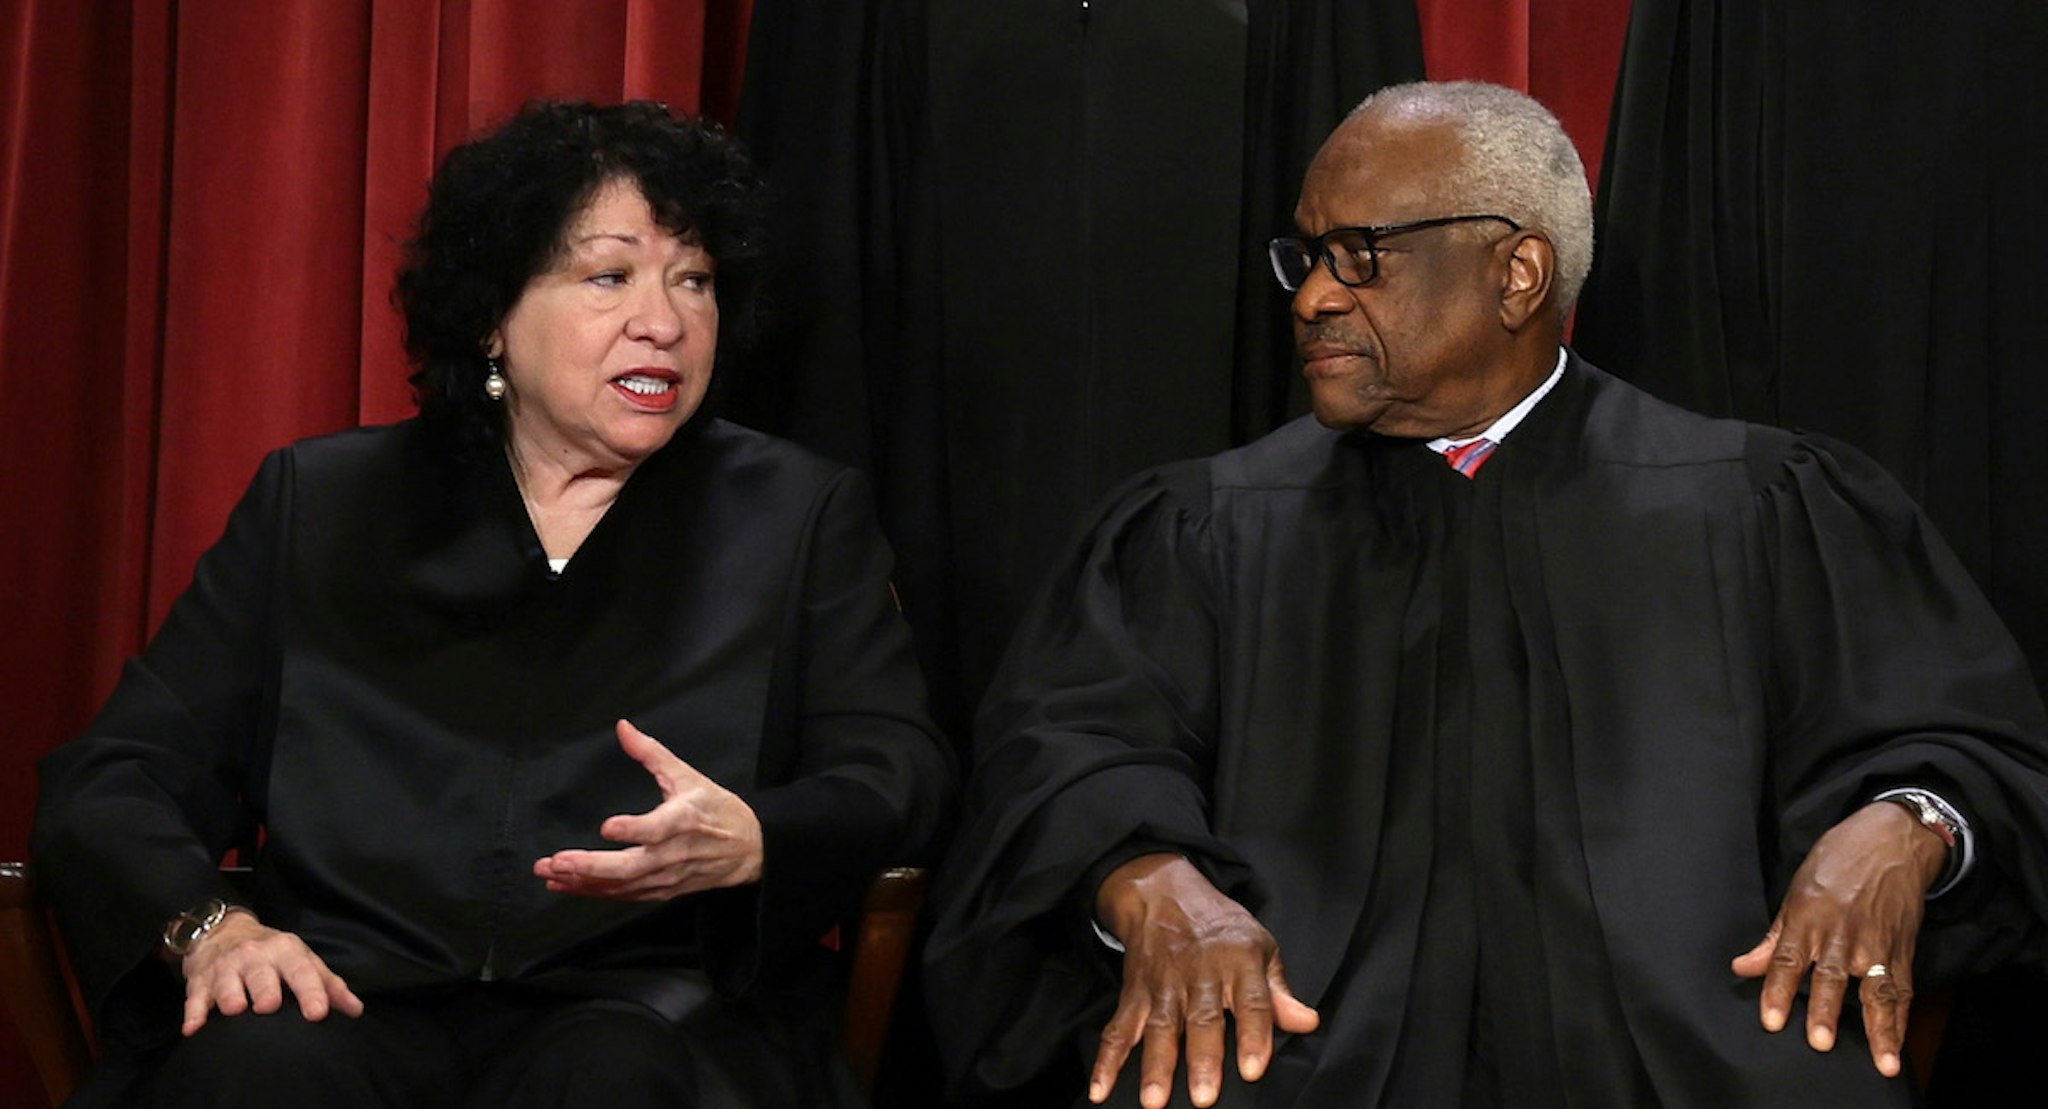 WASHINGTON, DC - OCTOBER 07: United States Supreme Court Associate Justice Sonia Sotomayor (L) and Associate Justice Clarence Thomas (R) pose for their official portrait. (Photo by Alex Wong/Getty Images)